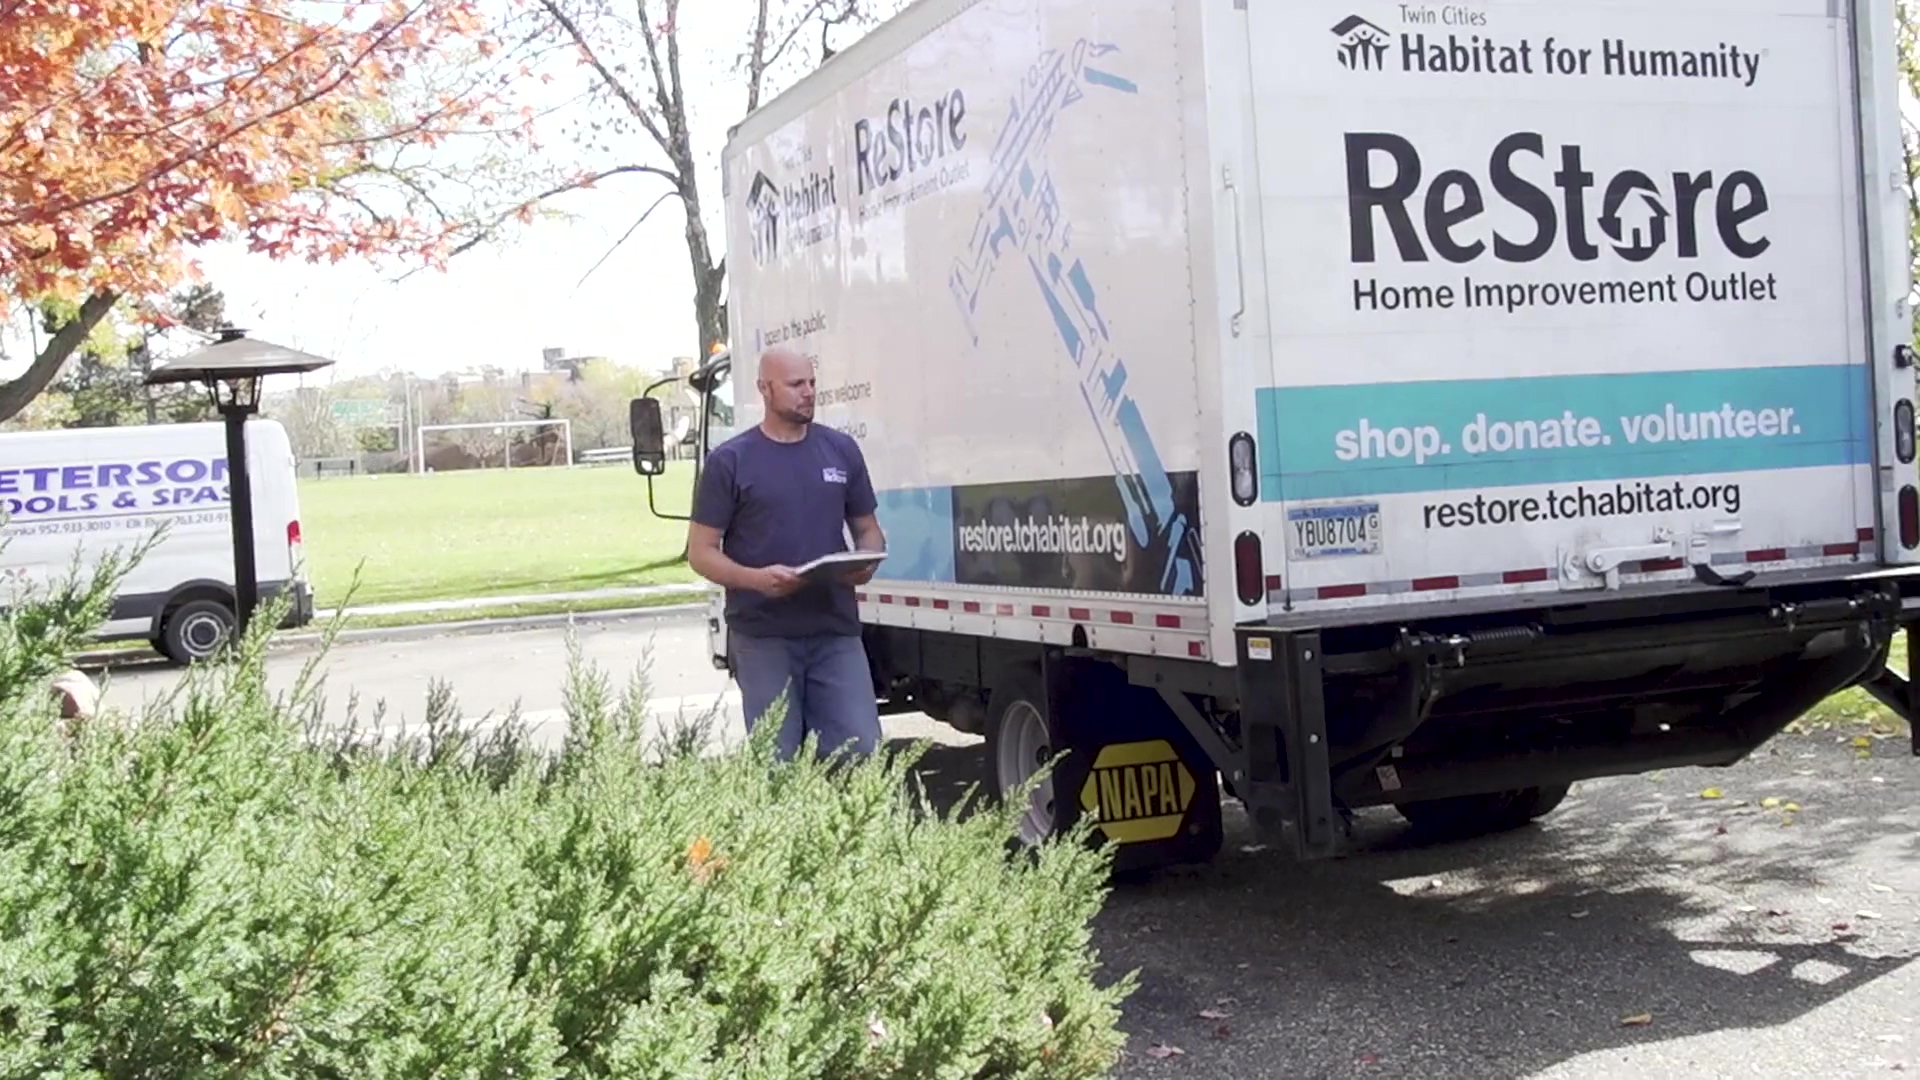 A ReStore employee with the ReStore truck in a driveway.